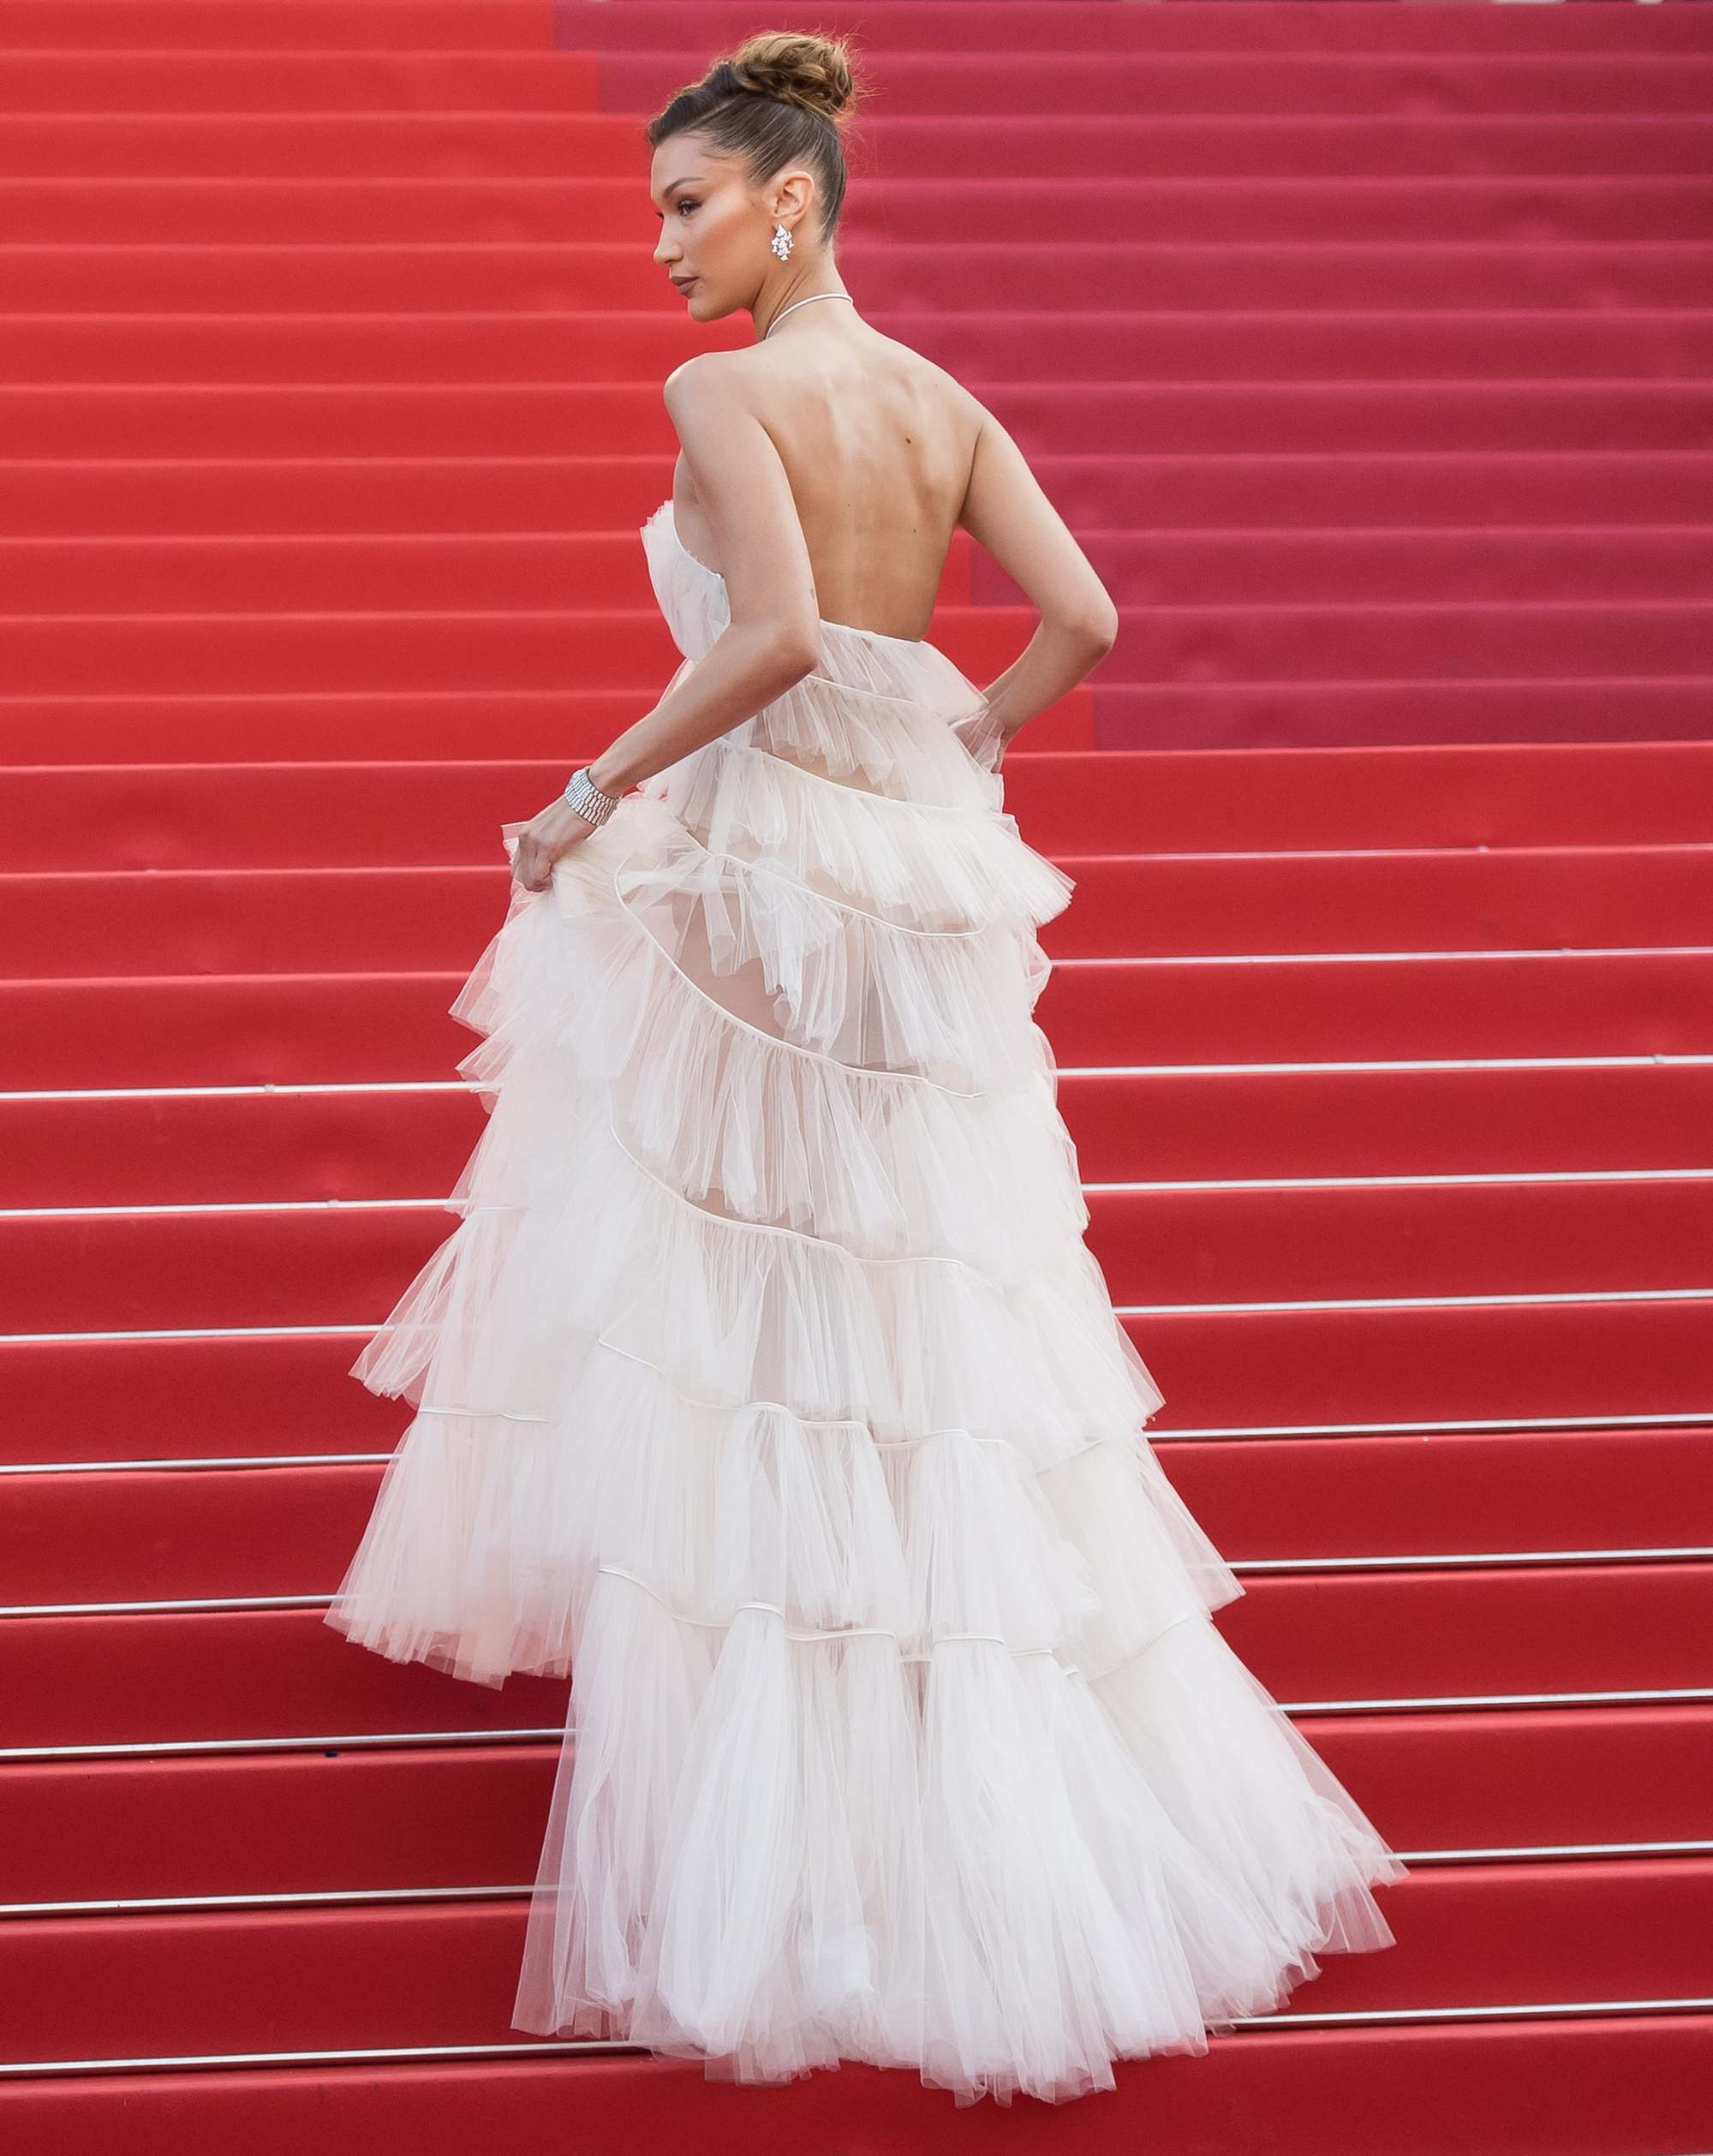 Bella Hadid at the Cannes Film Festival: Causing a storm when she wore a 35-year-old dress, wearing sexy clothes, but also had 2 indiscretions to remember her life - Photo 6.